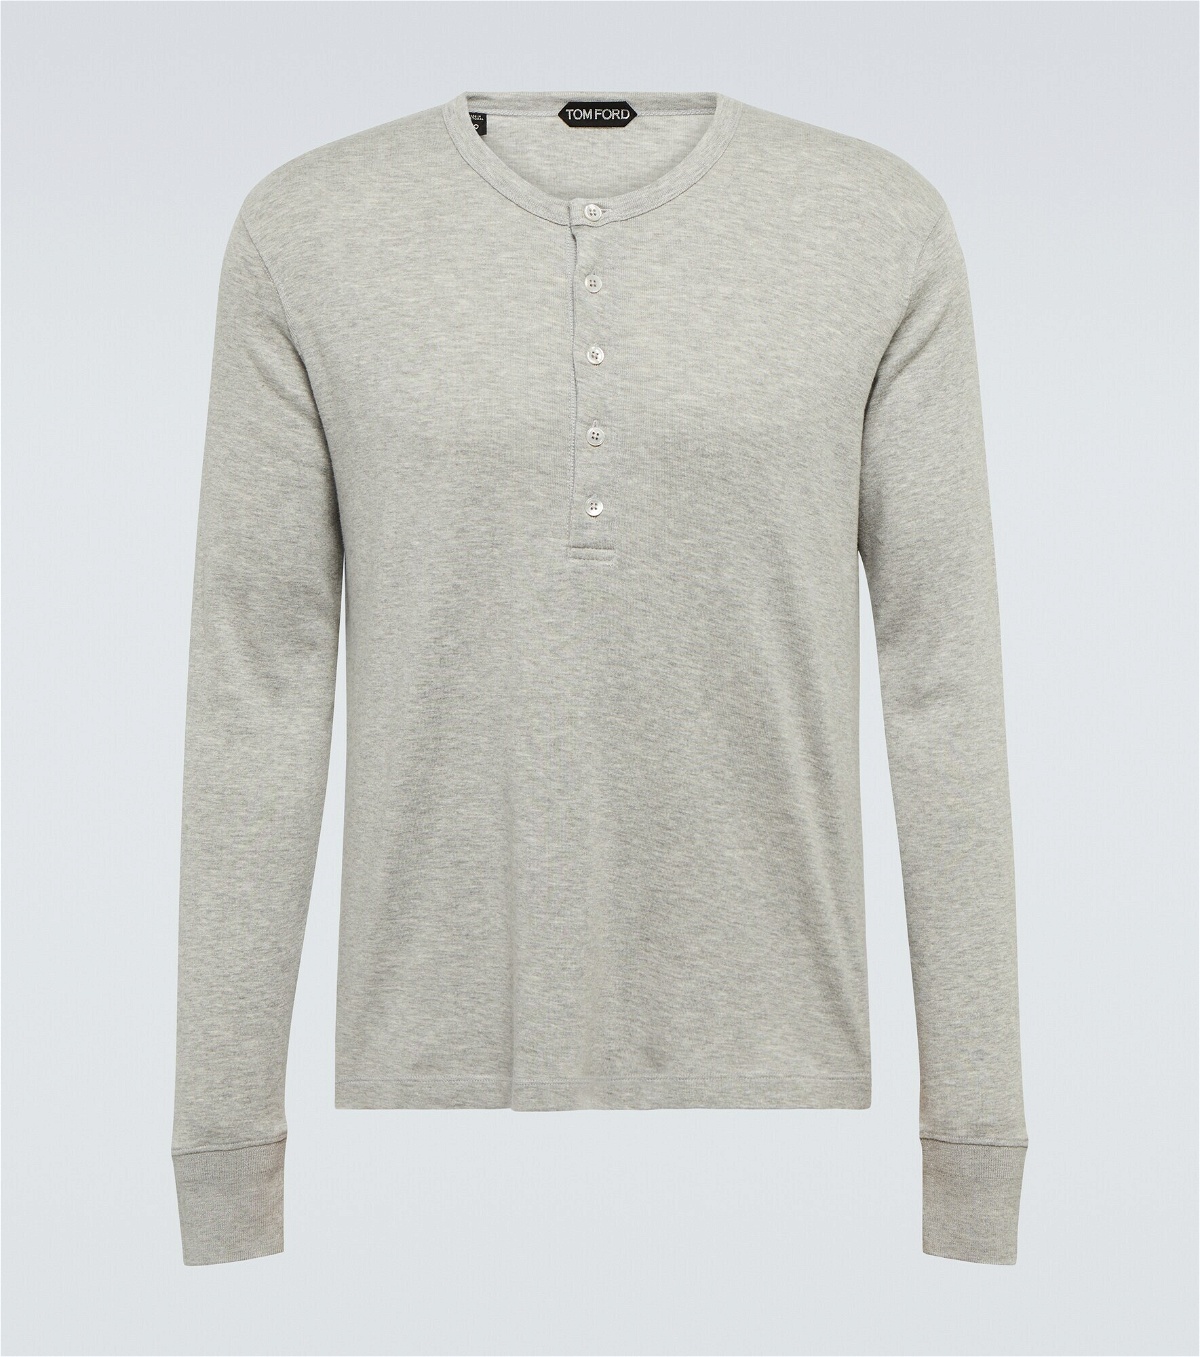 Tom Ford - Jersey Henley shirt TOM FORD